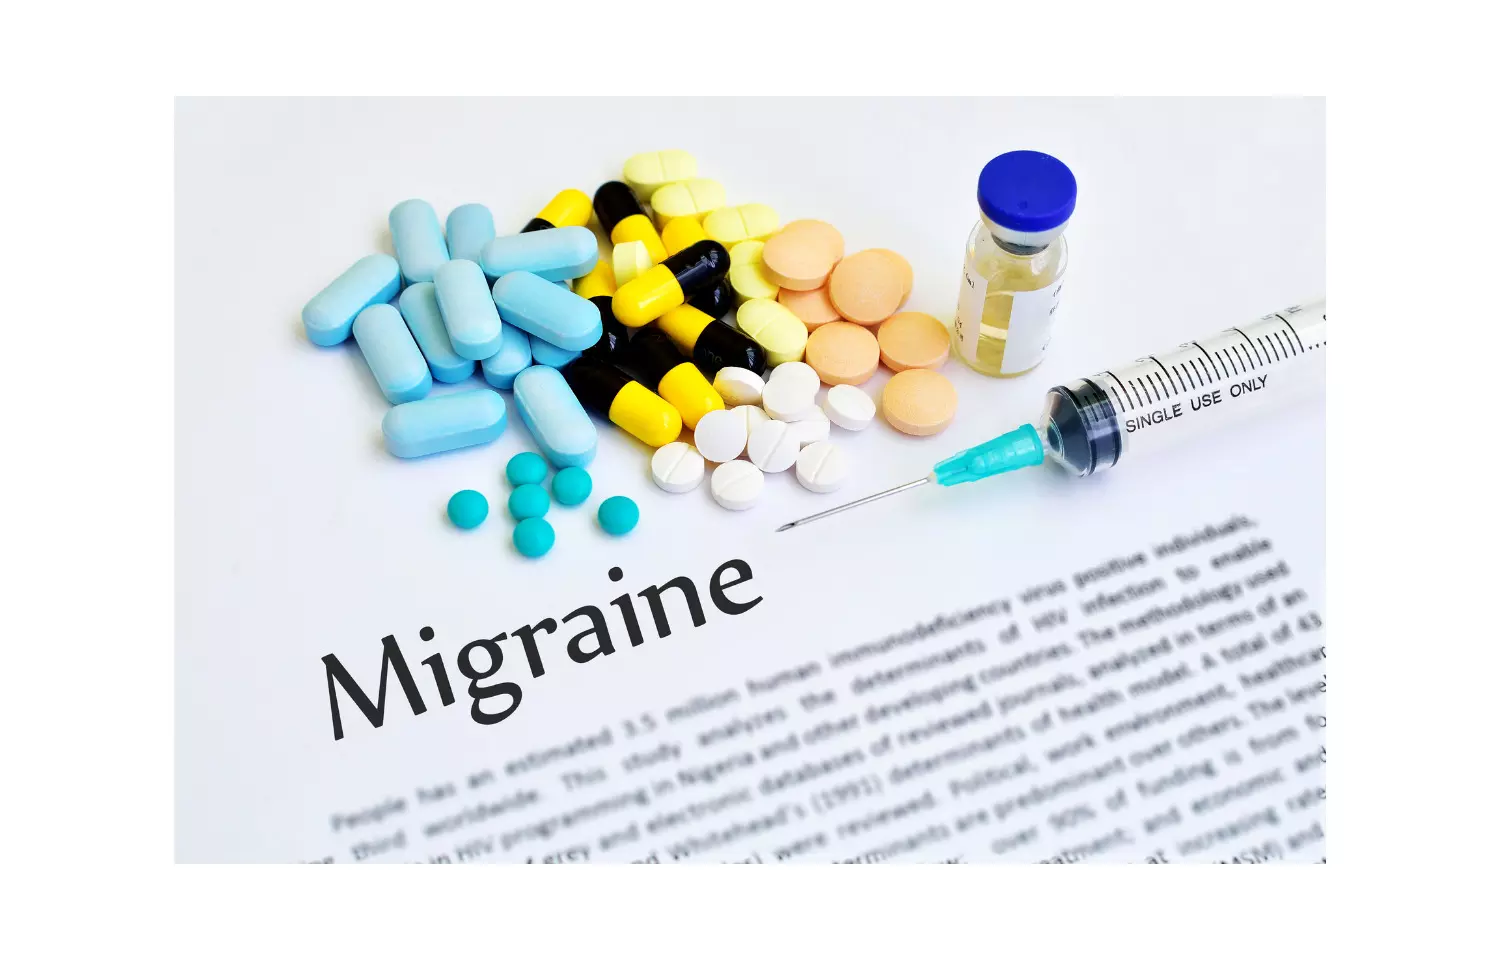 Use of Galcanezumab for migraine prevention led to erectile dysfunction: A case report